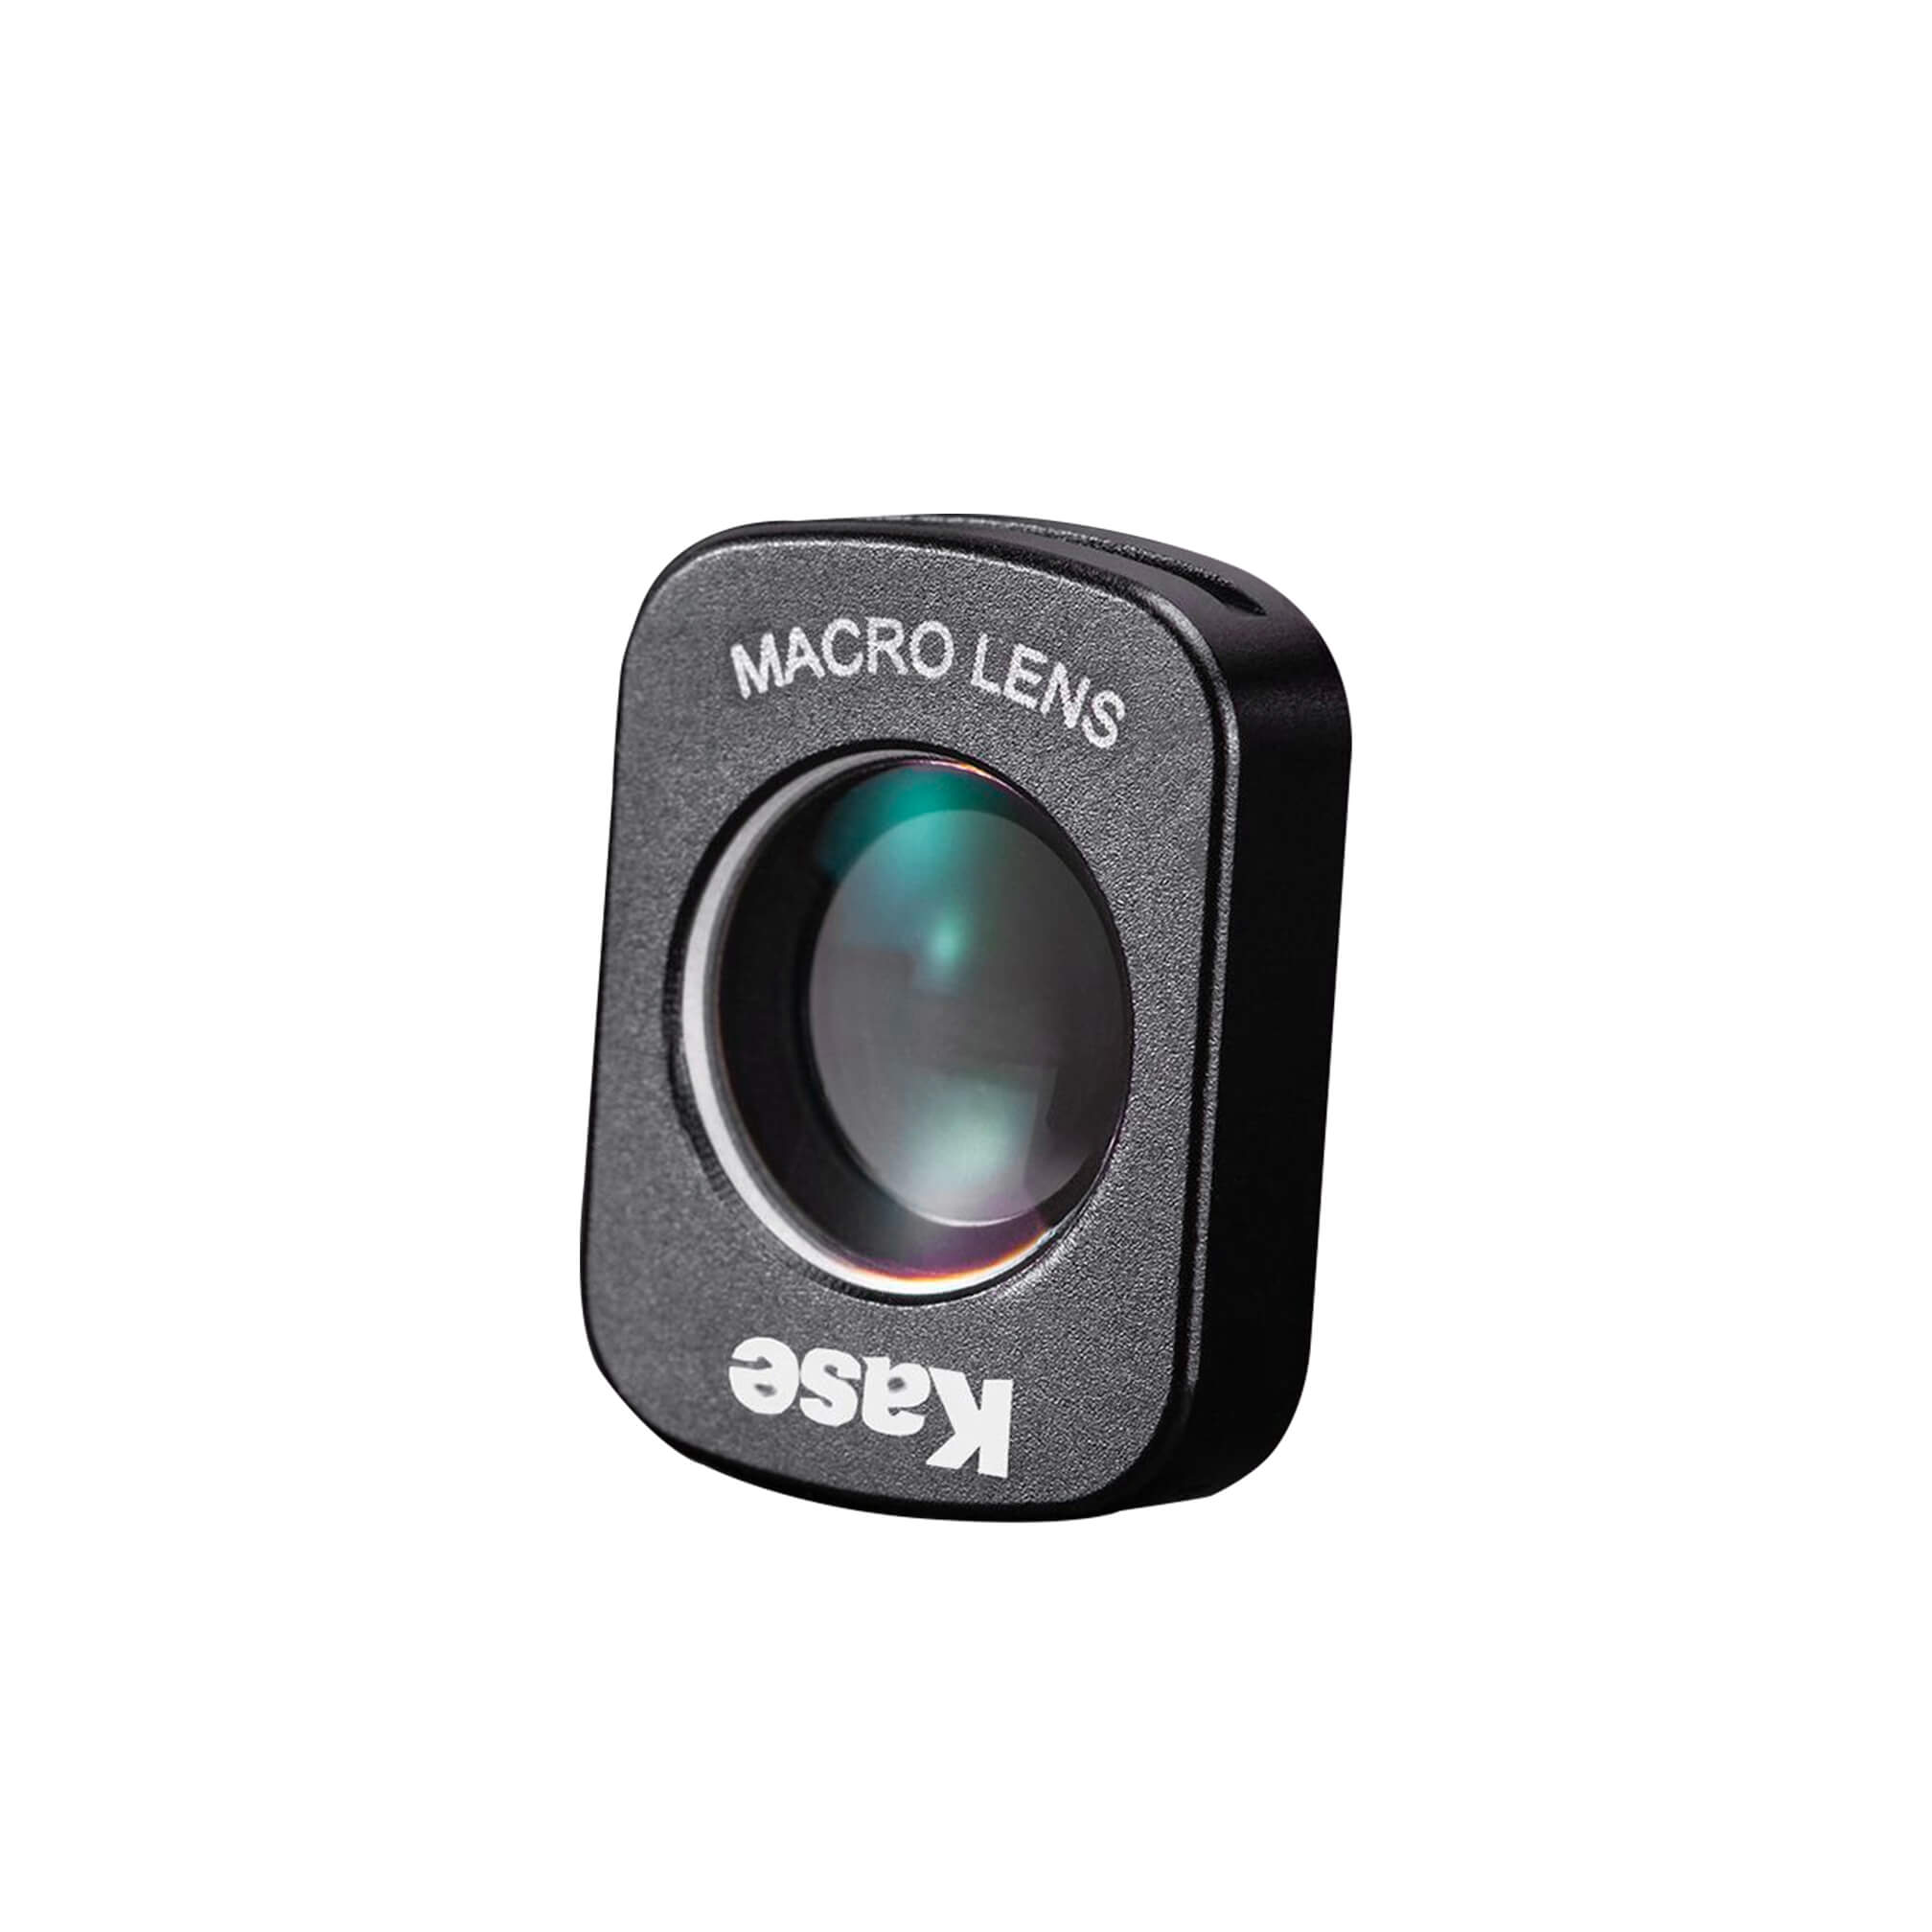 Kase Macro Close-up Add-on Lens for DJI OSMO Pocket Camera Magnetic Quick Swap 